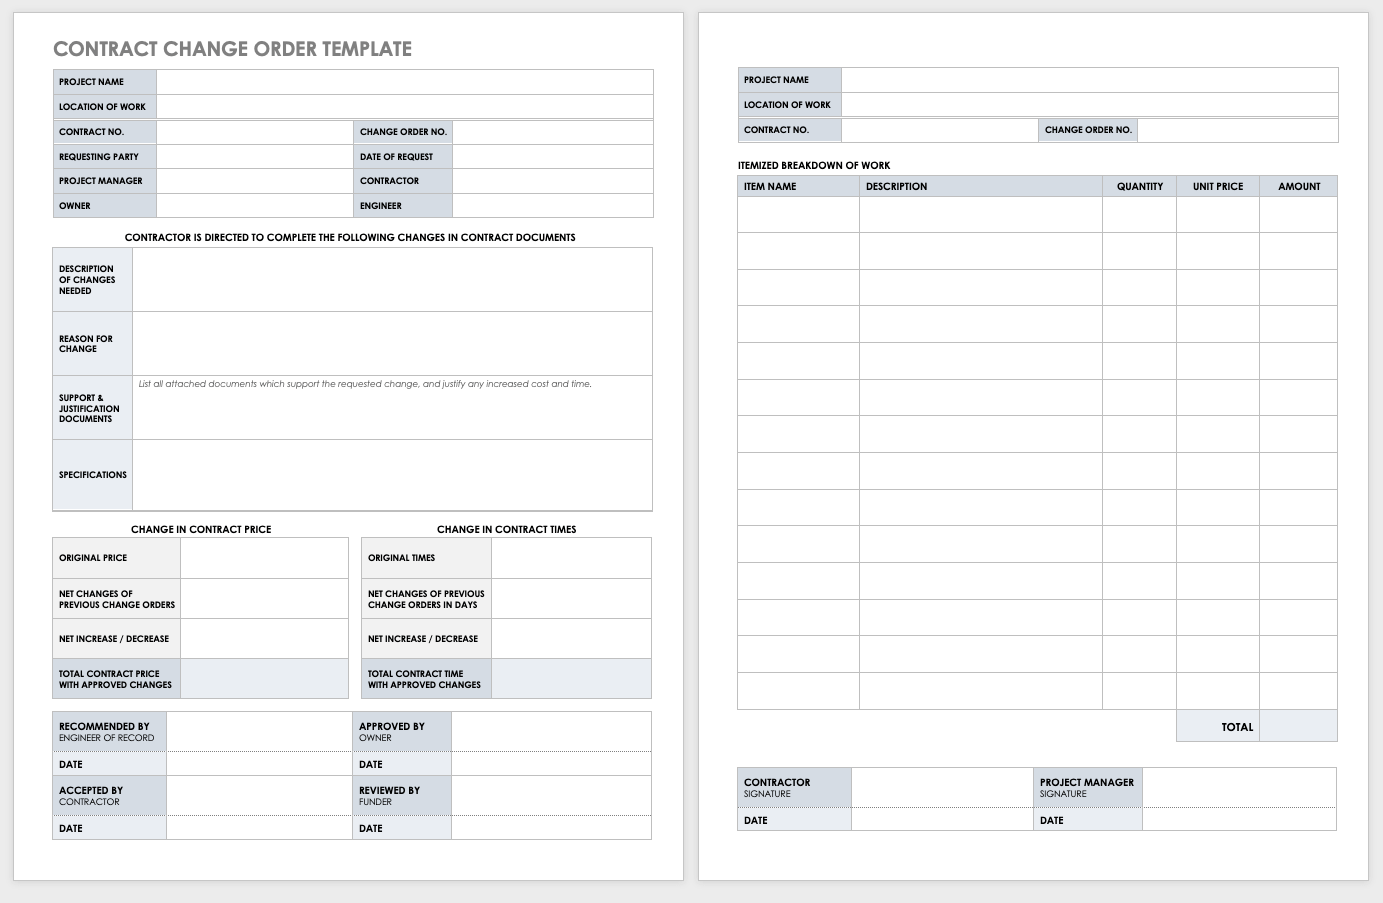 Contract Change Order Template